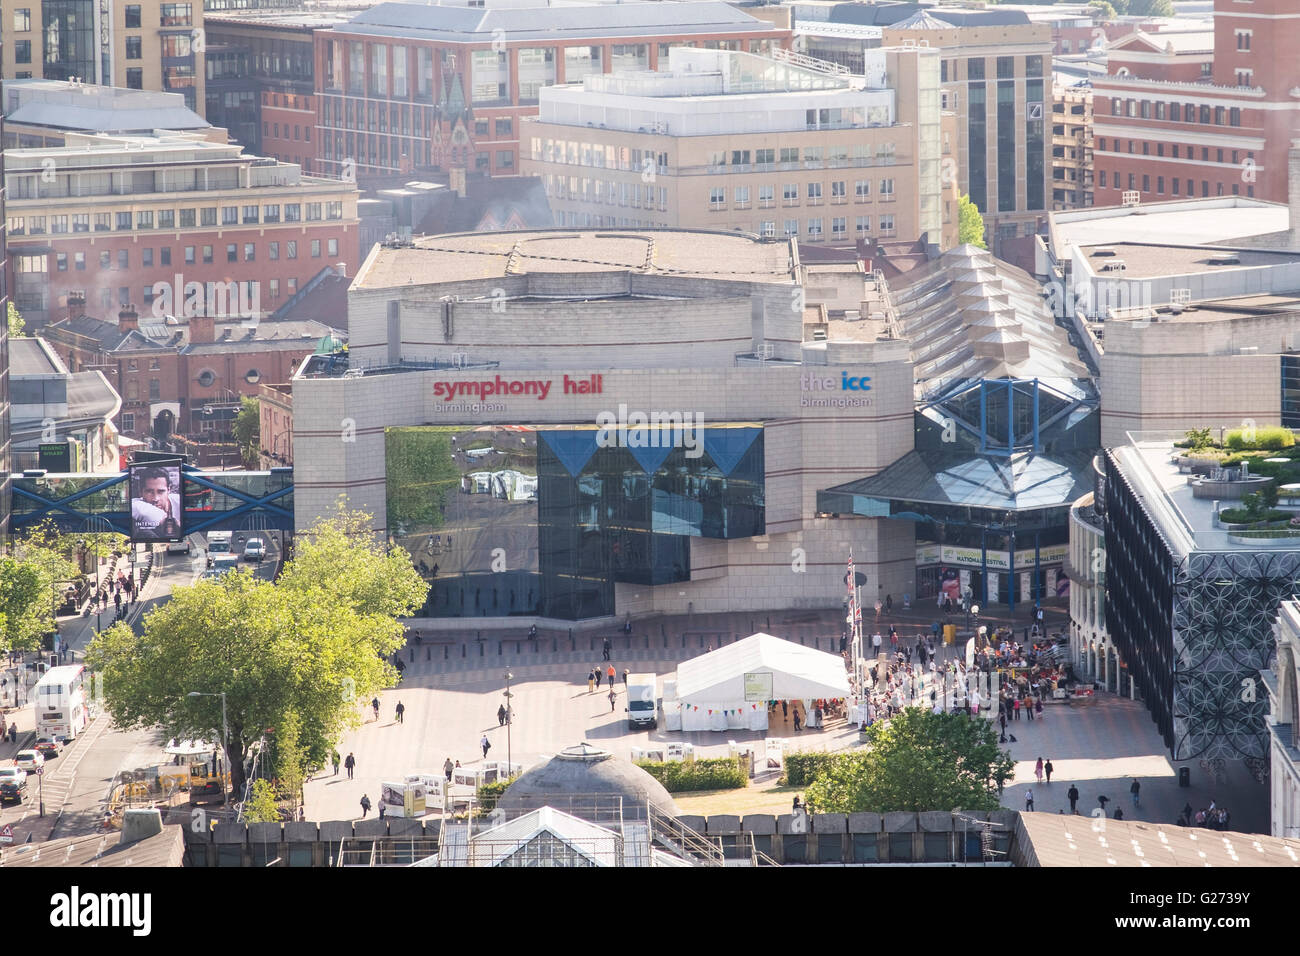 Aerial photograph of Birmingham City Centre, England. Symphony Hall and the ICC in Centenary Square. Stock Photo